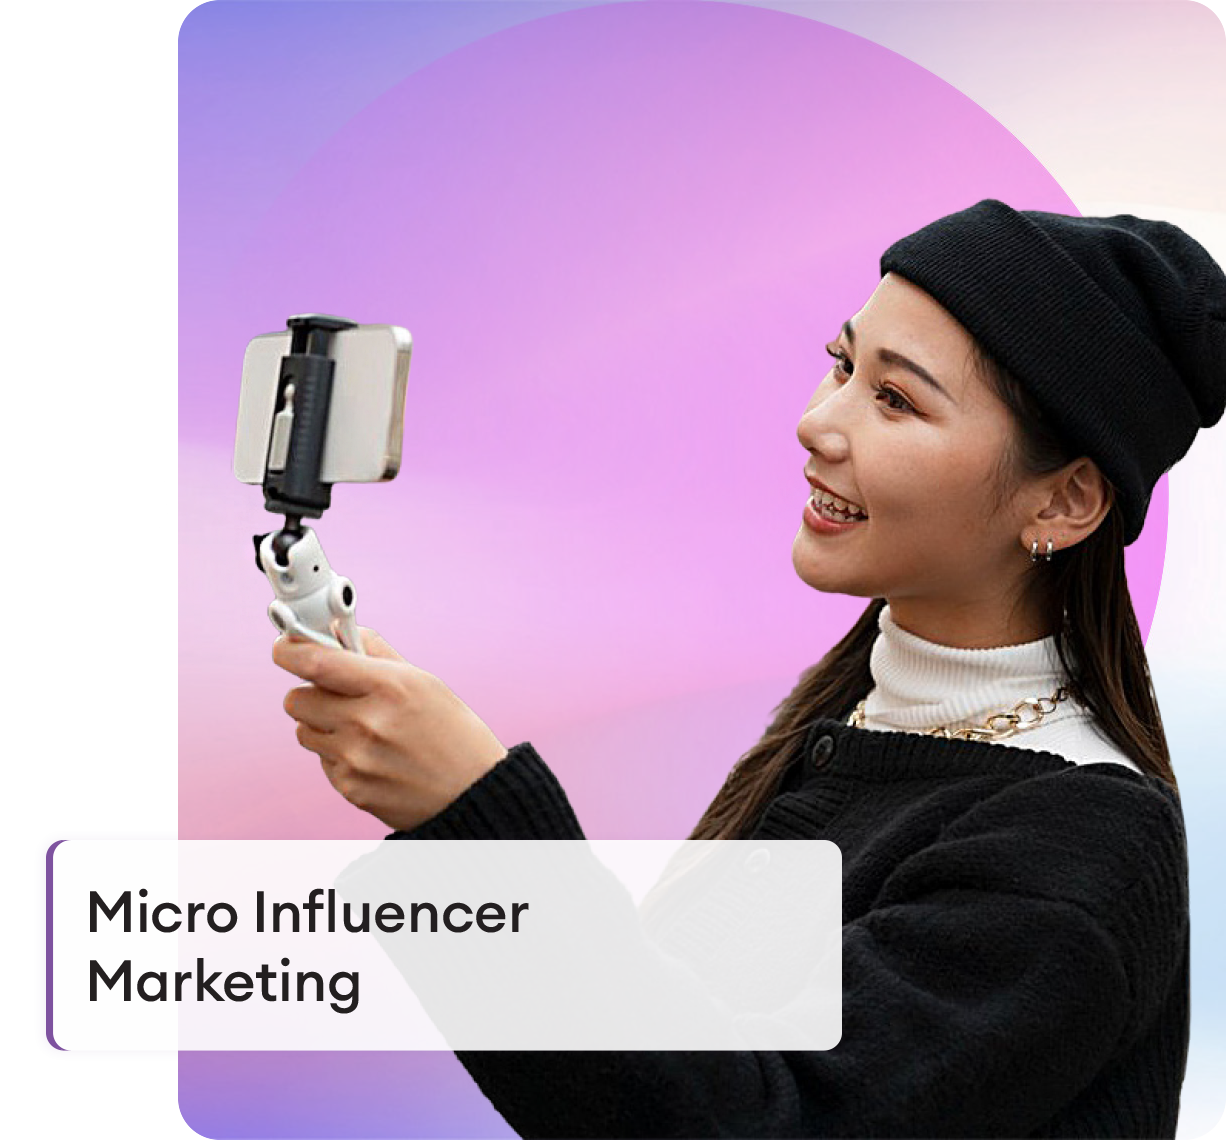 What Is a Micro-Influencer and What is Micro-Influencer Marketing?